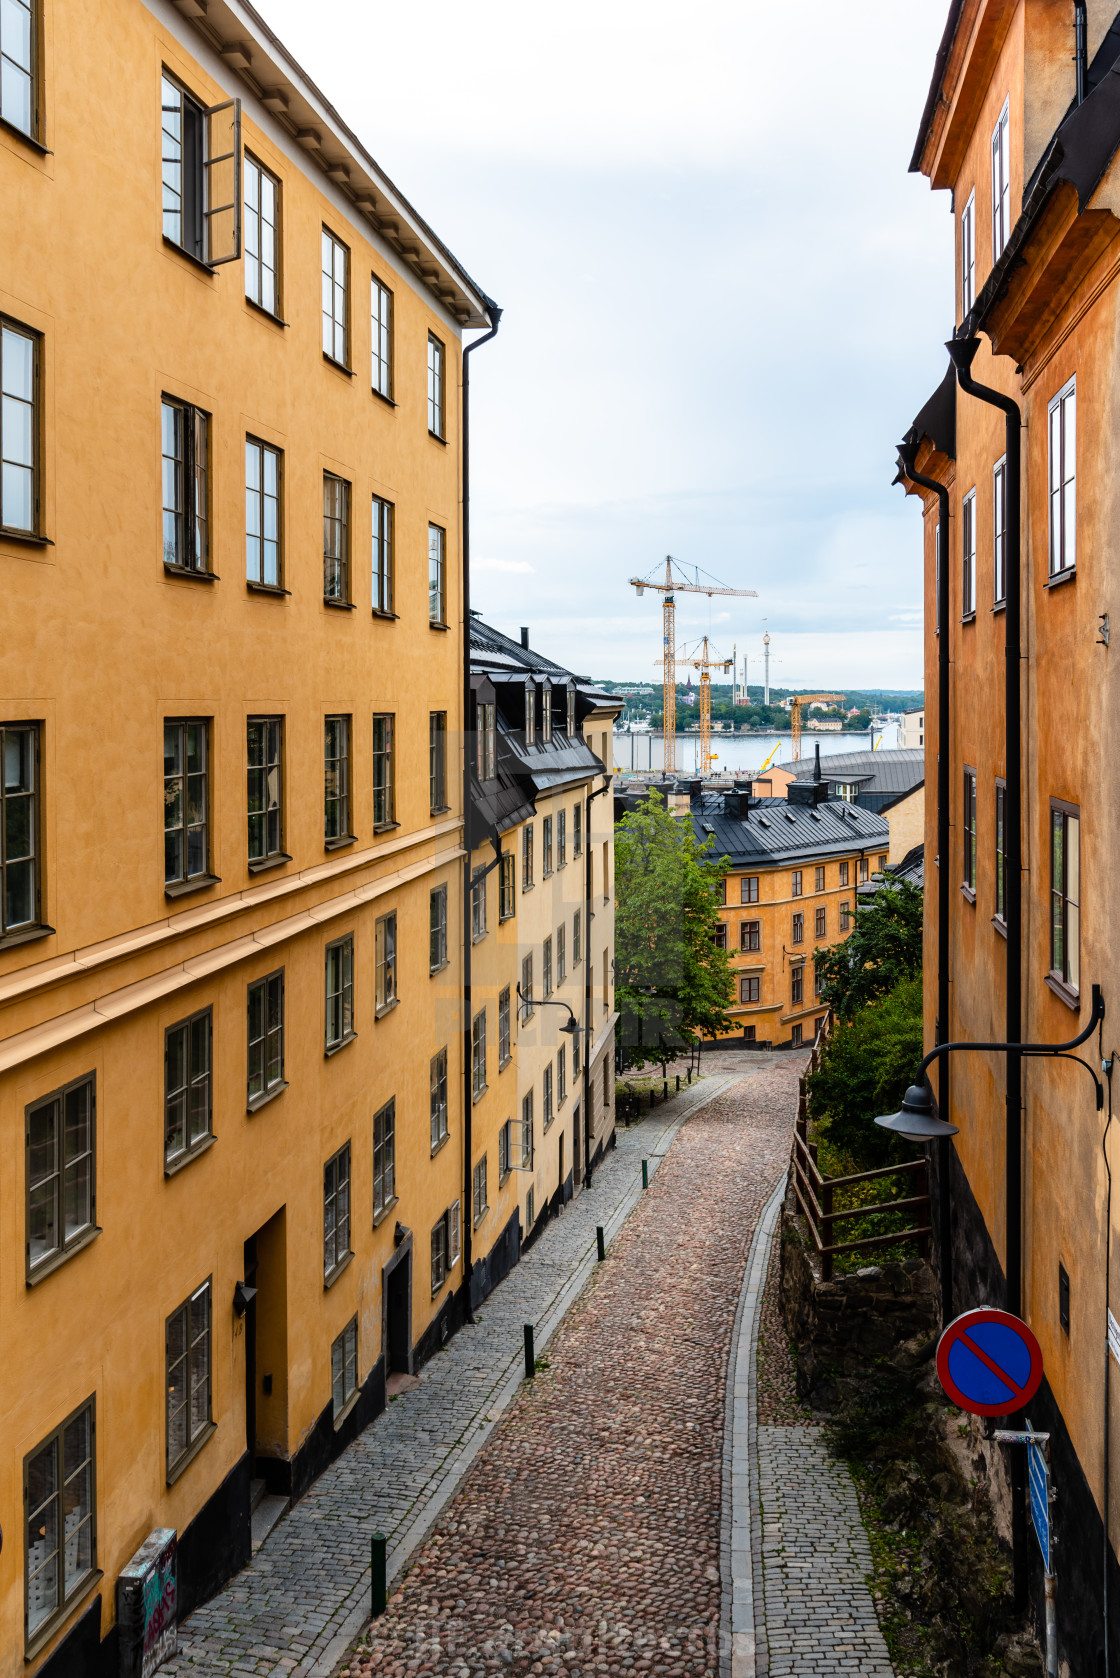 "Picturesque street with colorful houses in Sodermalm in Stockholm" stock image